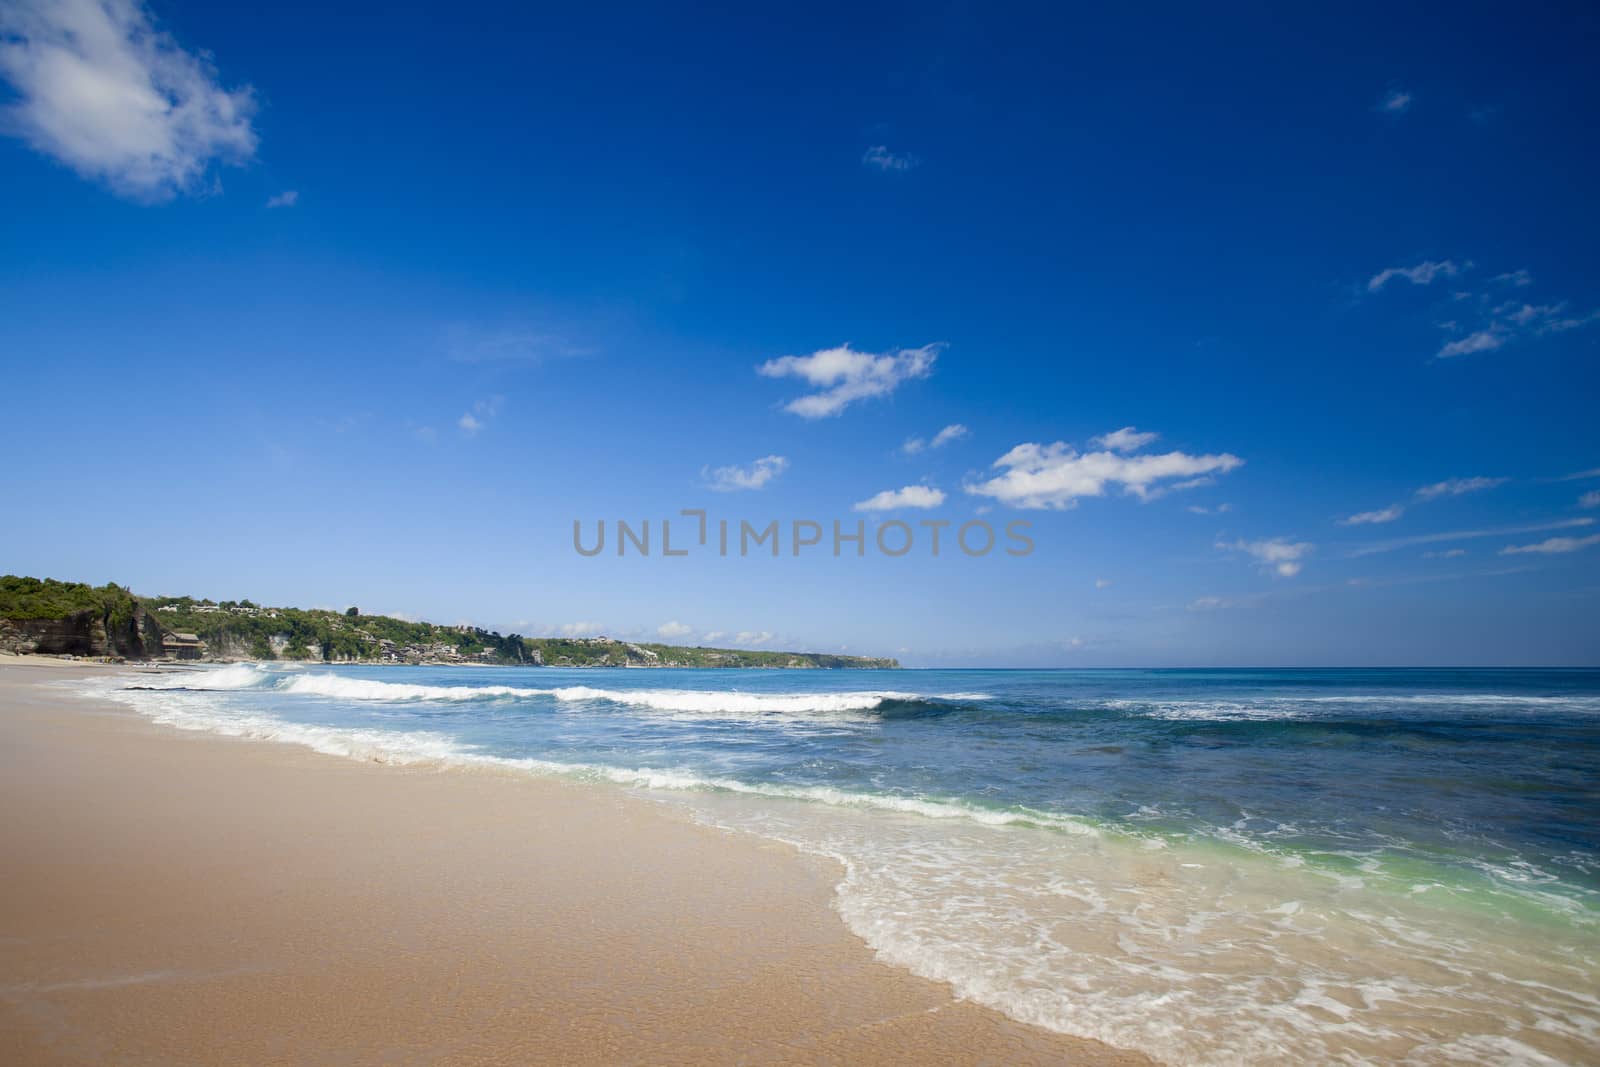 Beautiful landscape picture of a white sand tropical beach